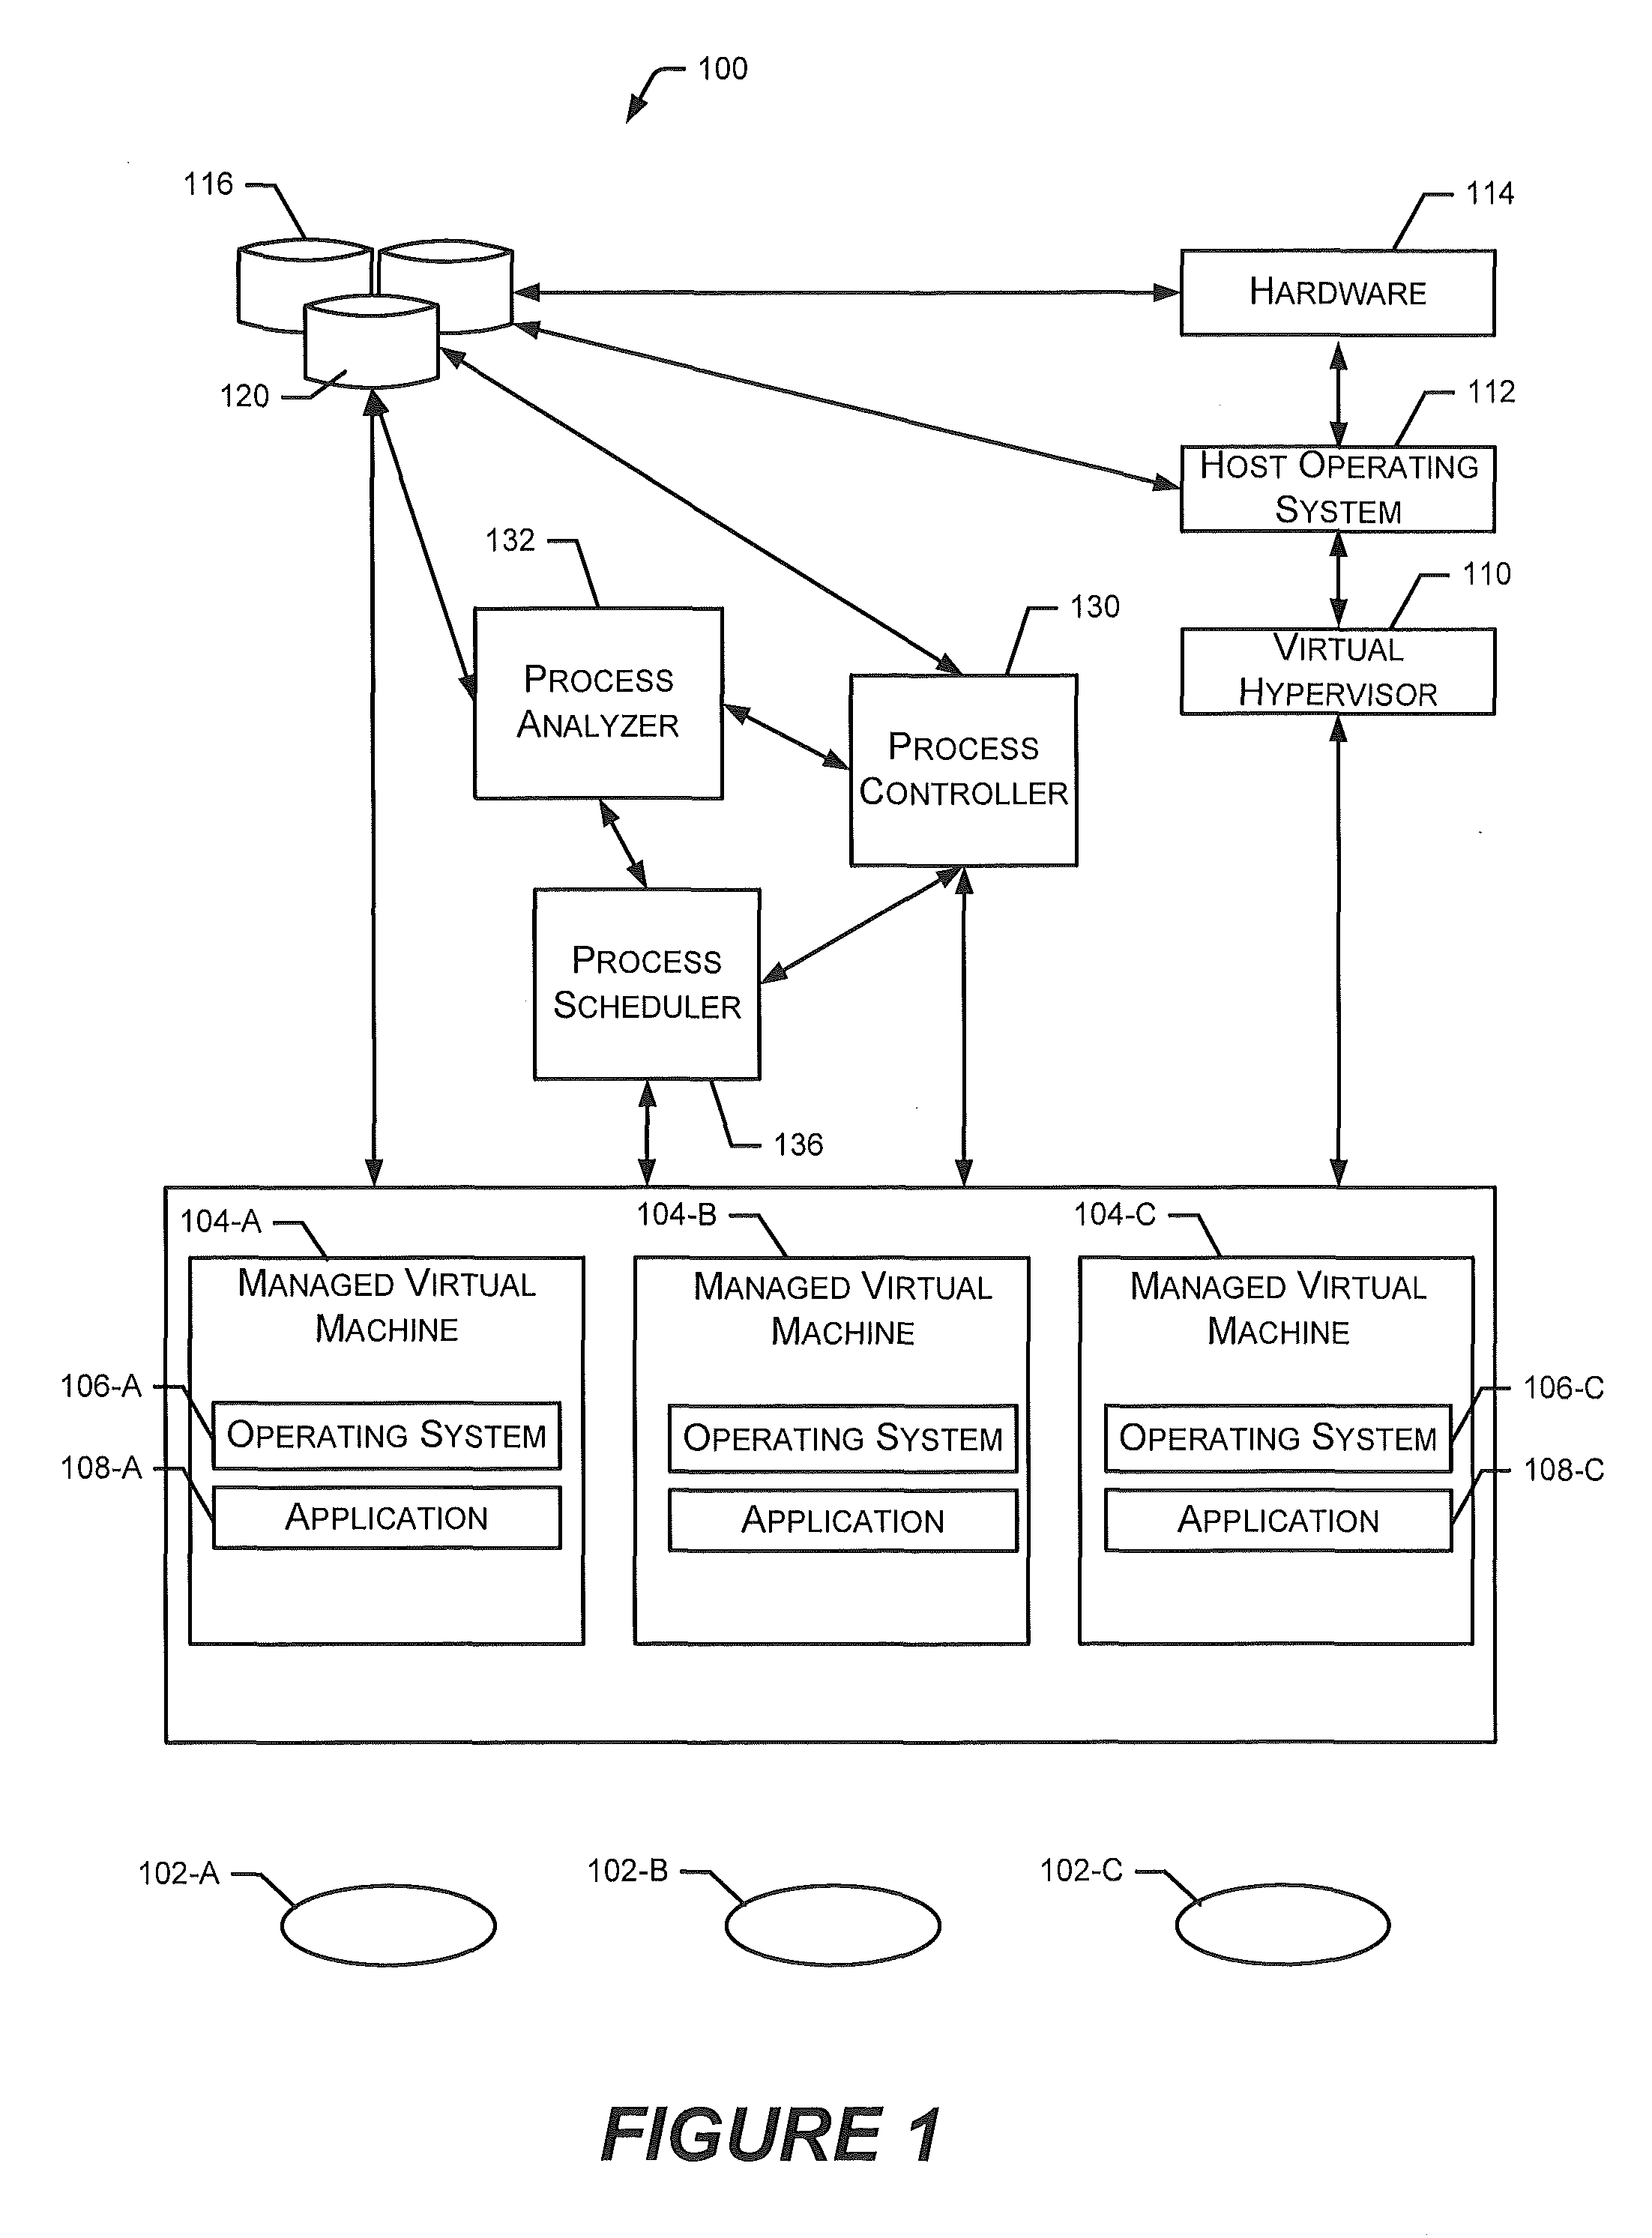 Holistic non-invasive evaluation of an asynchronous distributed software process